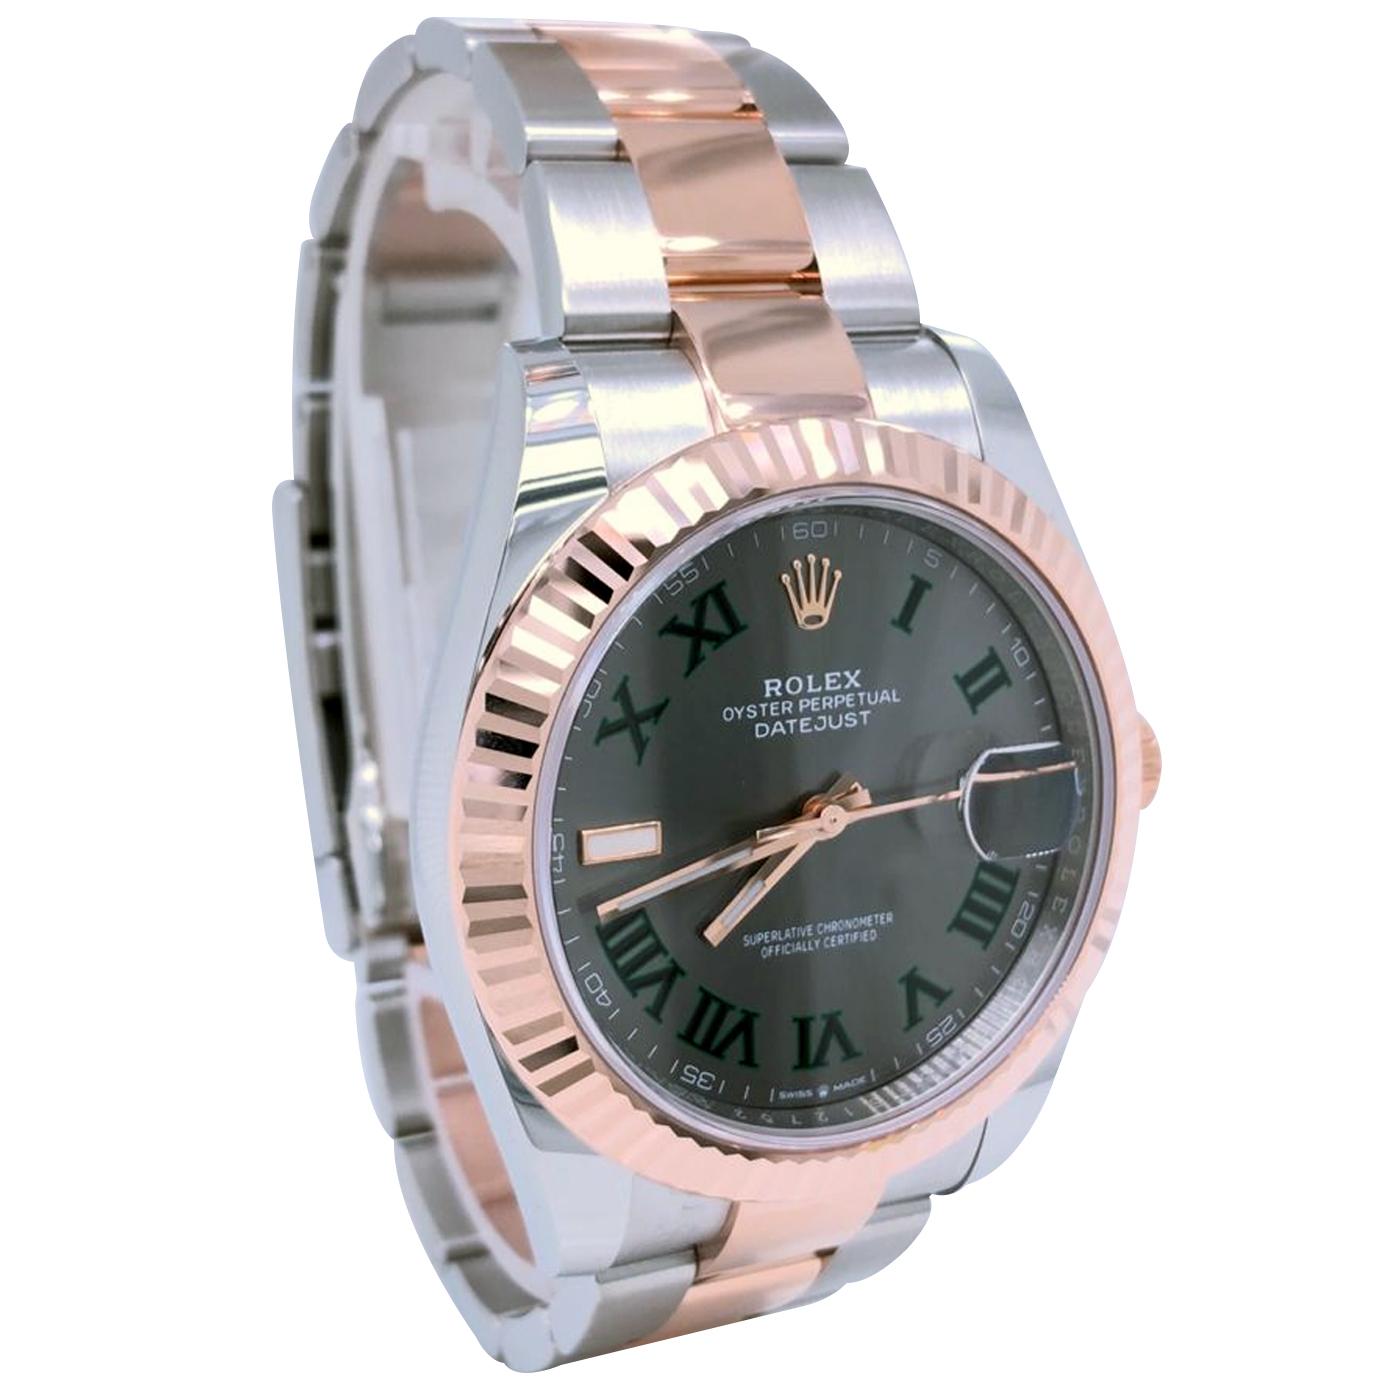 Rolex Datejust Two Tone Wimbledon Dial Oyster Fluted Men's Watch 126333 3